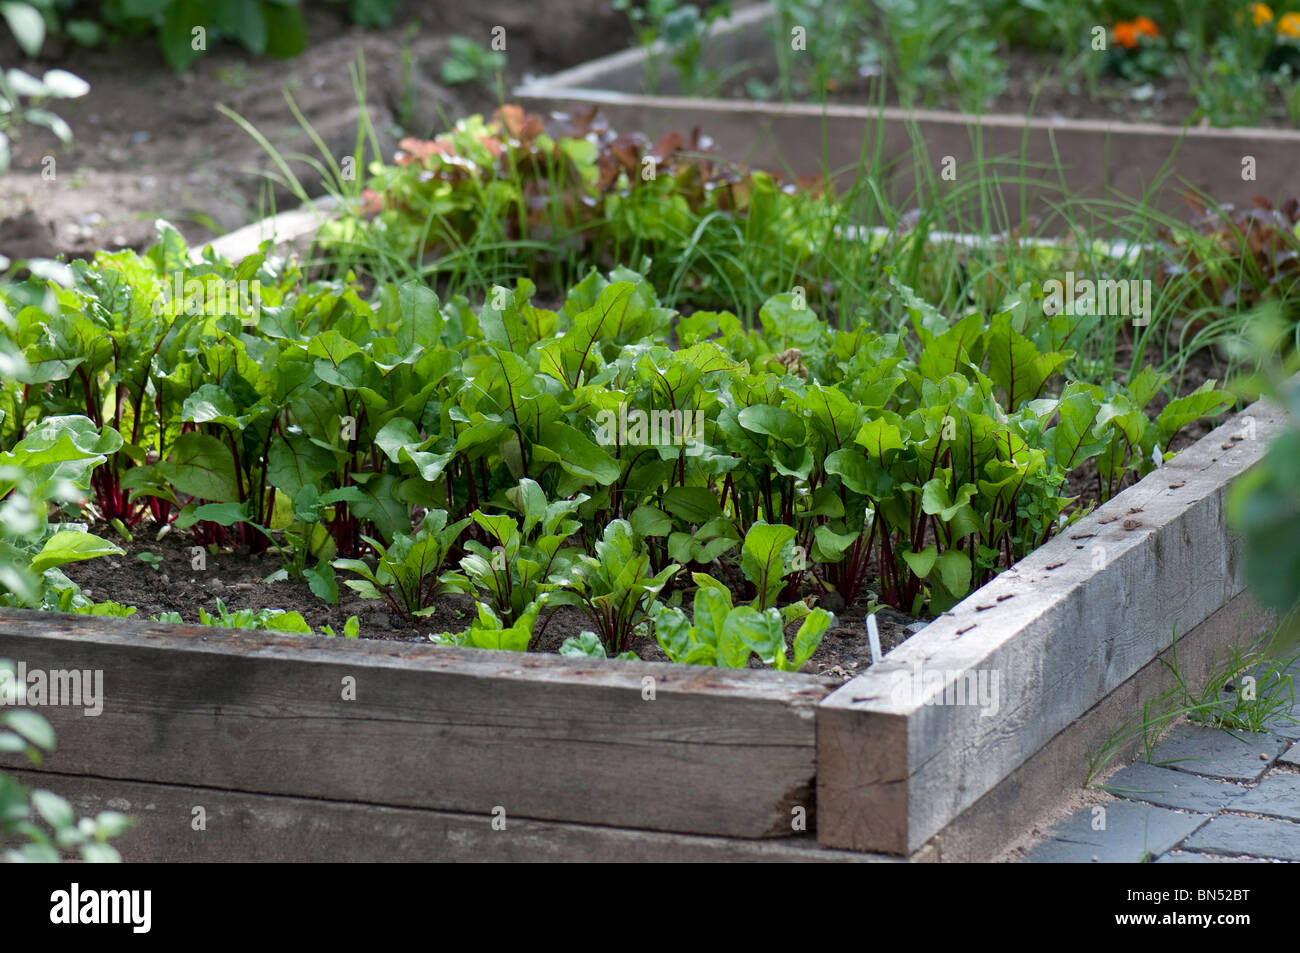 Makeshift raised bed for growing vegetables Stock Photo